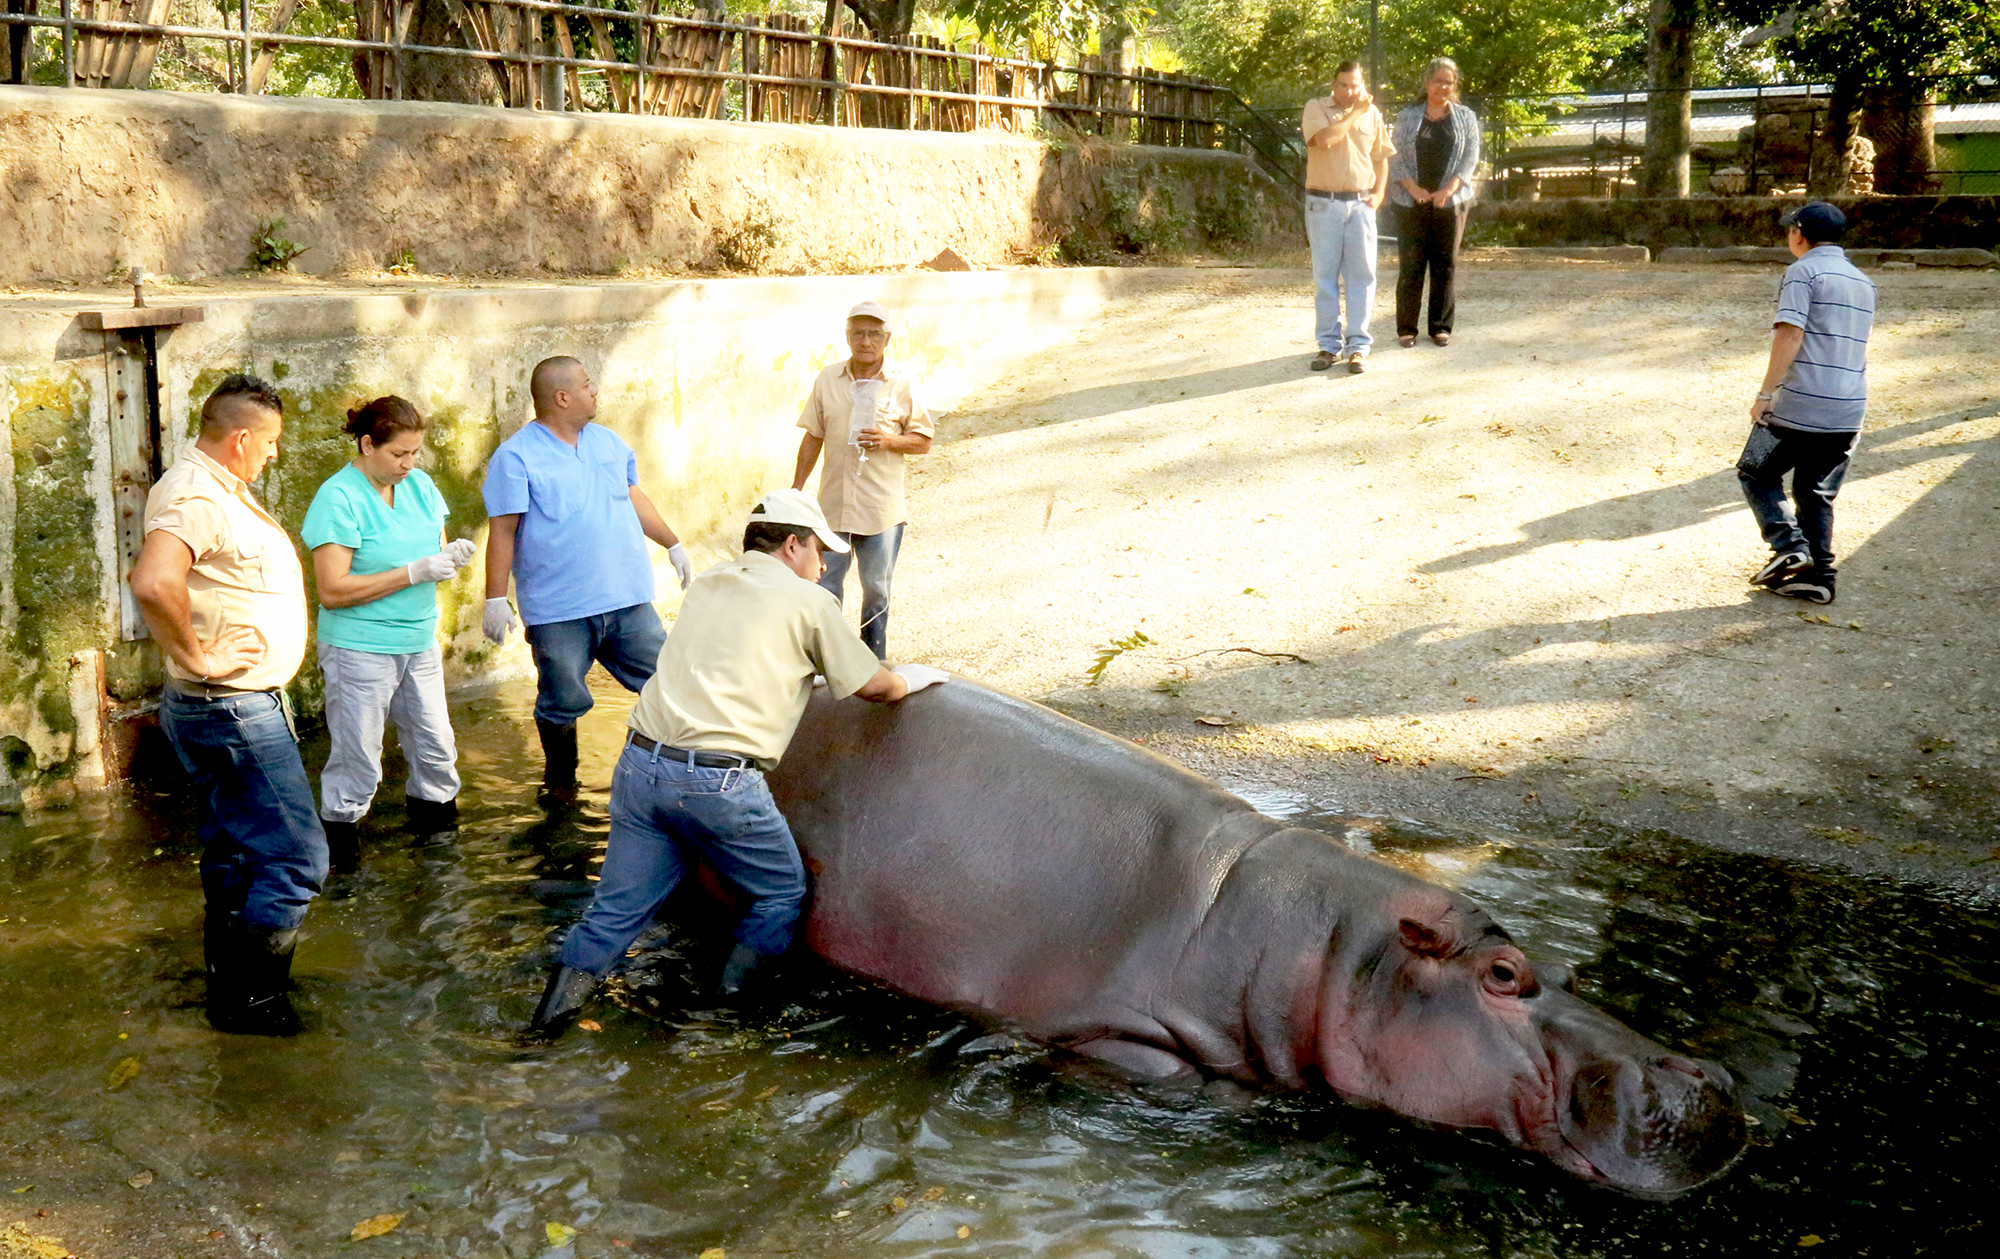 A handout photo made available by El Salvador's Culture Ministry shows El Salvador National Zoo personnel attending to a hippopotamus named Gustavito in San Salvador, El Salvador on Feb. 25 2017. (El Salvador's Culture Ministry/EPA)